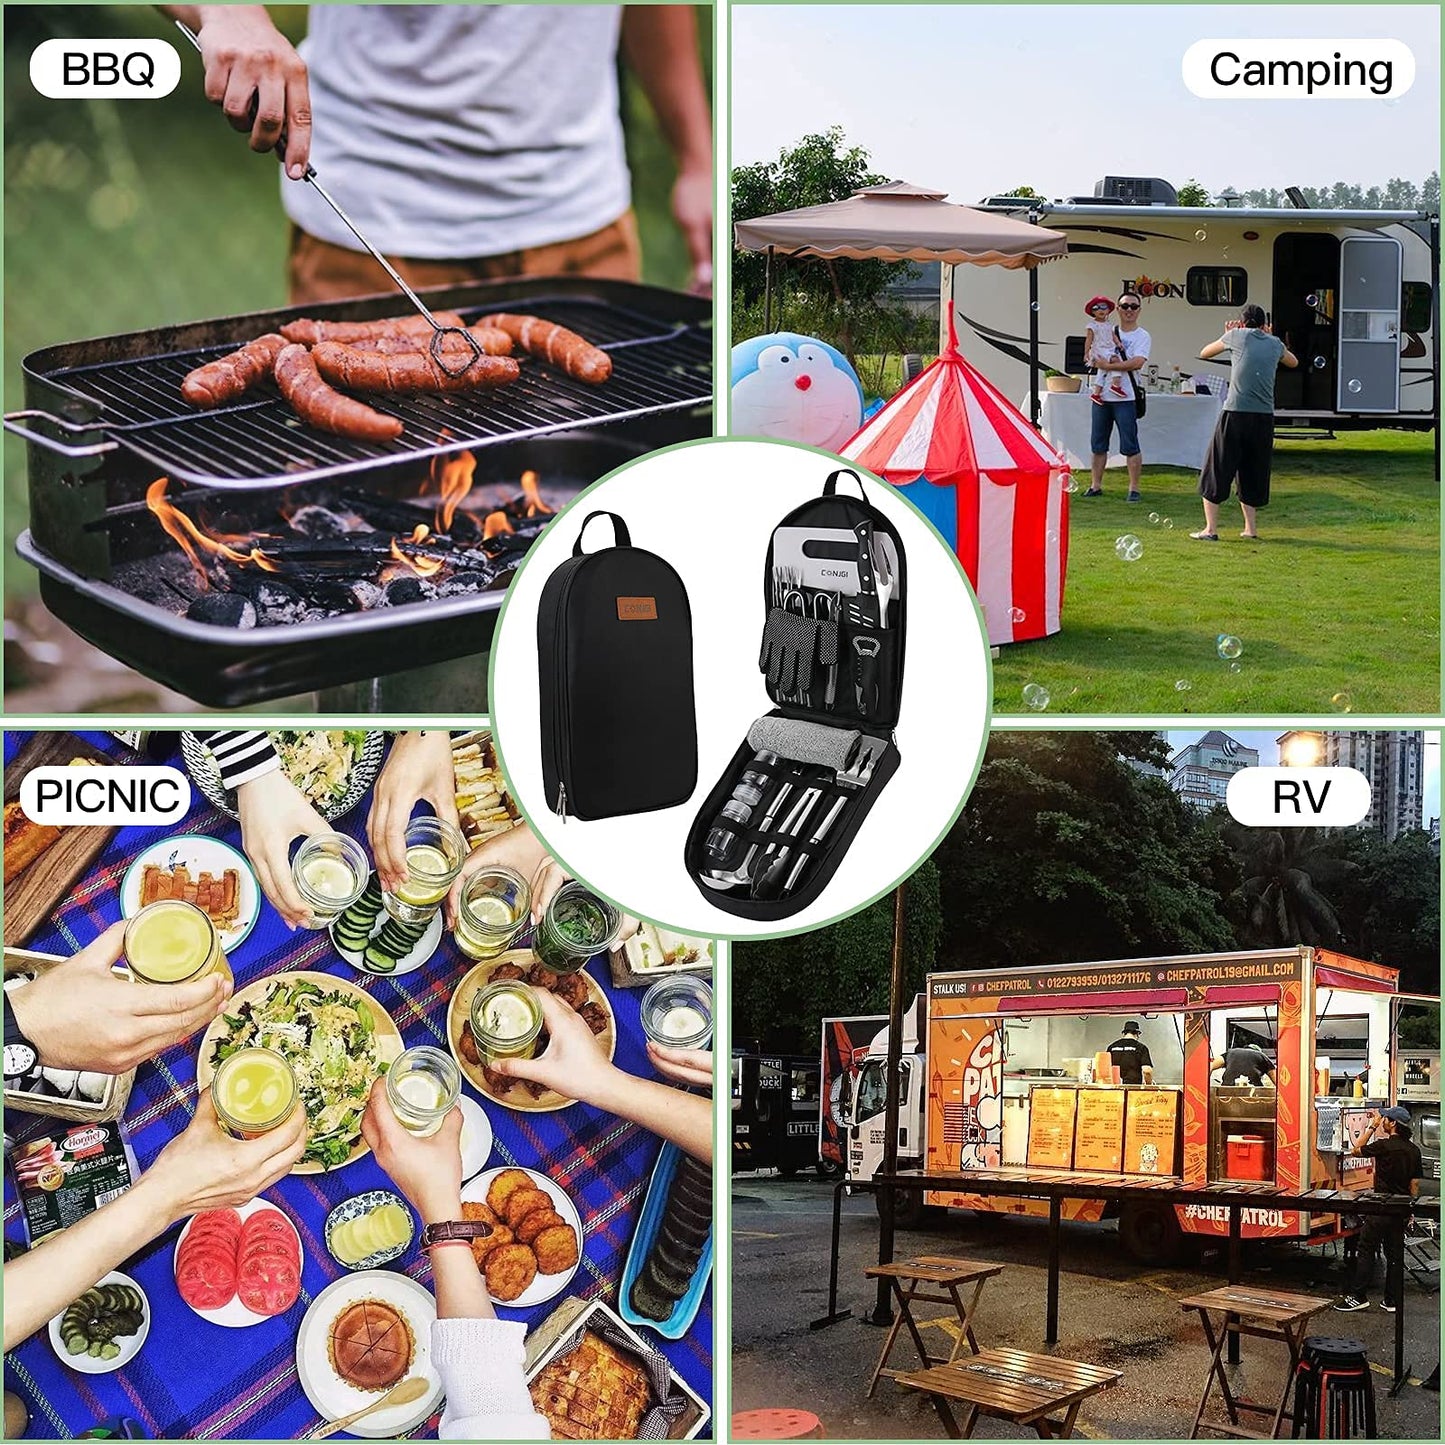 Portable Camping Cooking Utensils Set Bag Suitable for Fork, Spoon, Chopping Board, Chef's Knife,Kitchenware Storage